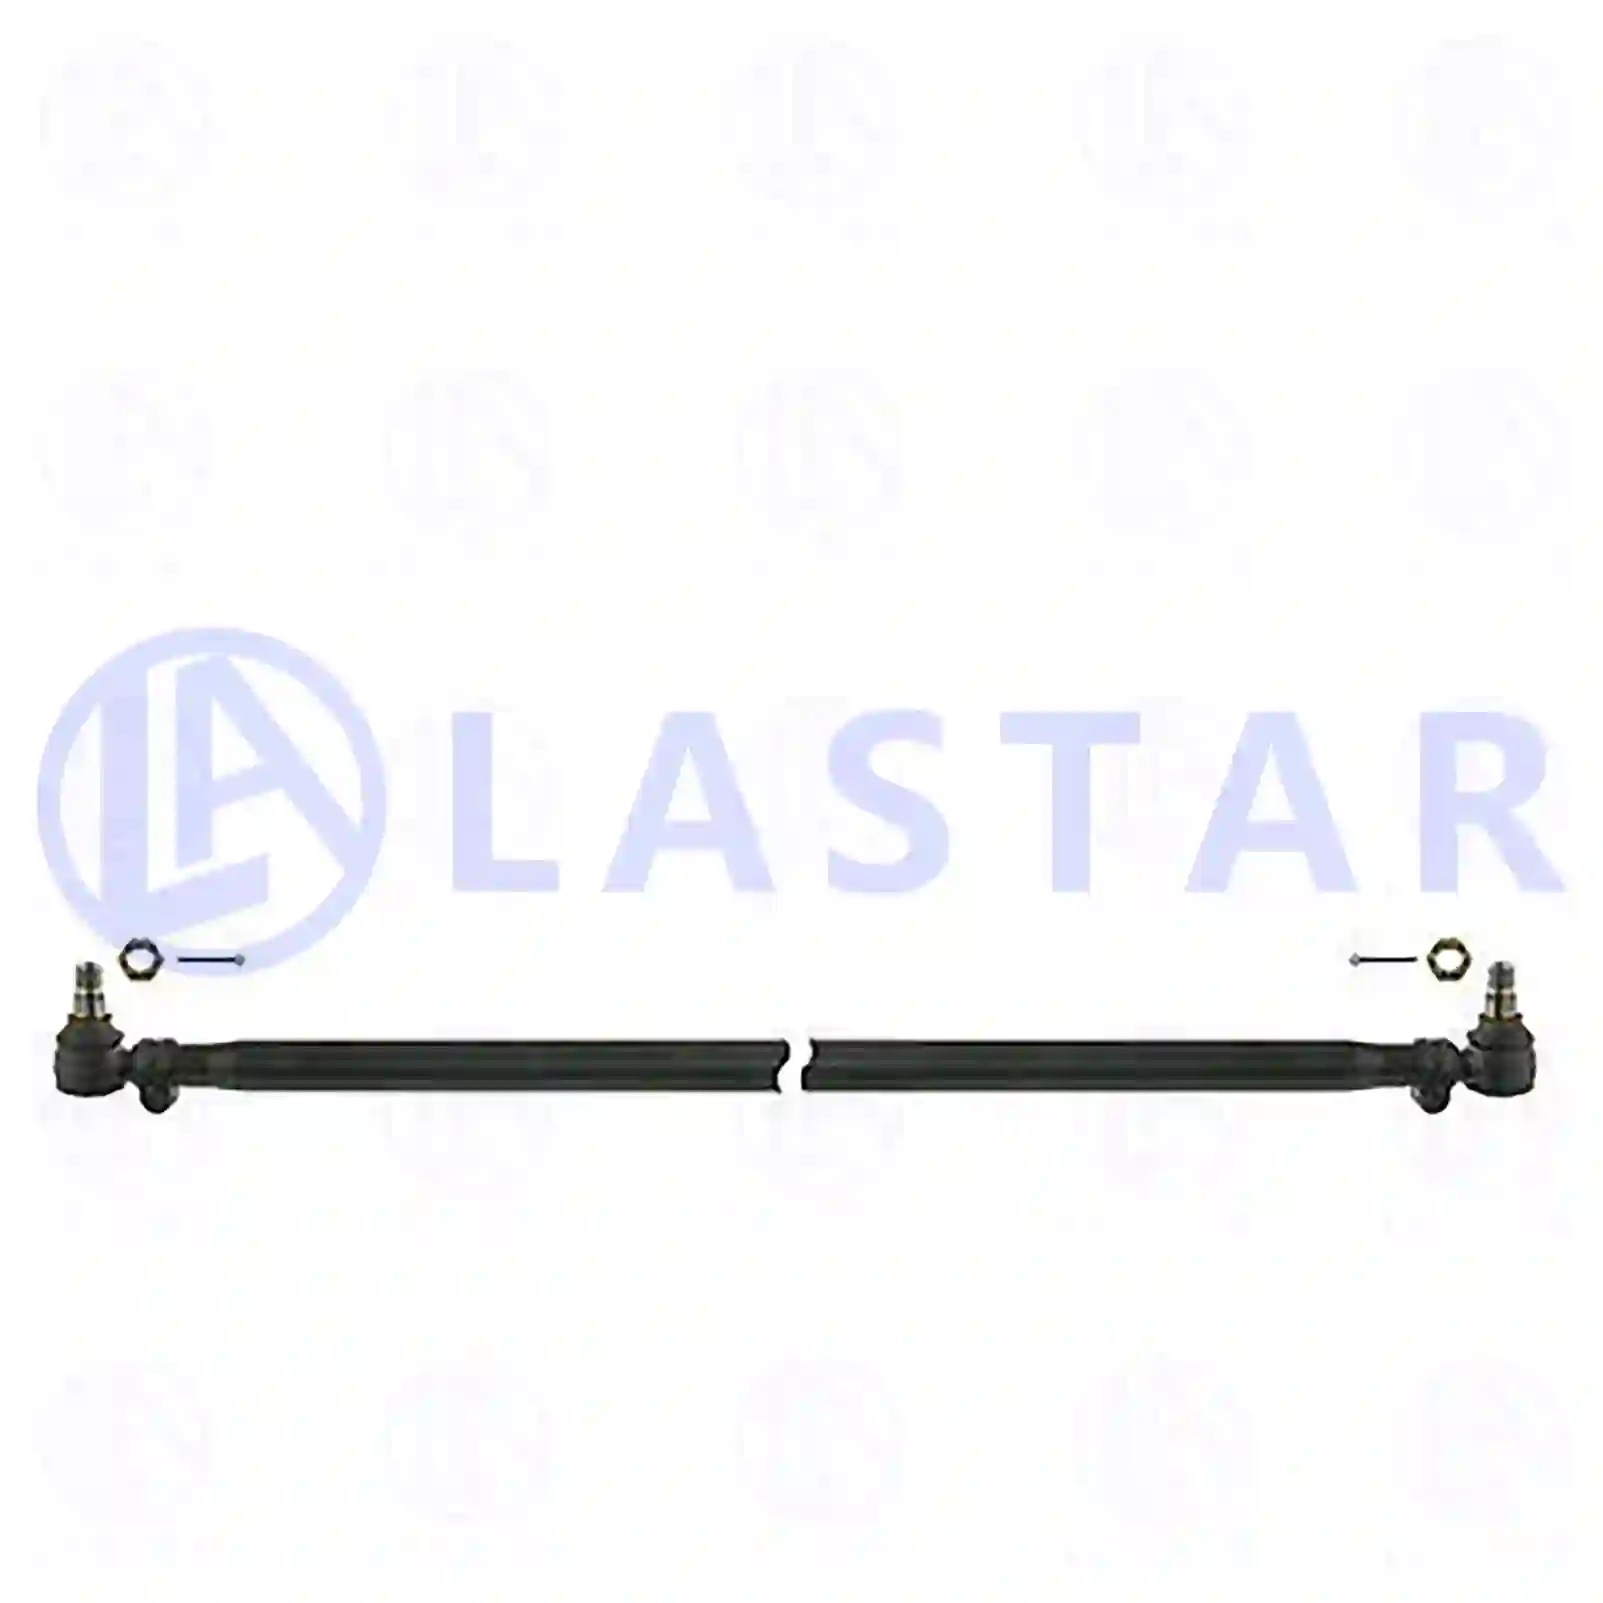 Track rod, 77730979, 04844041, 4844041, 98470968 ||  77730979 Lastar Spare Part | Truck Spare Parts, Auotomotive Spare Parts Track rod, 77730979, 04844041, 4844041, 98470968 ||  77730979 Lastar Spare Part | Truck Spare Parts, Auotomotive Spare Parts